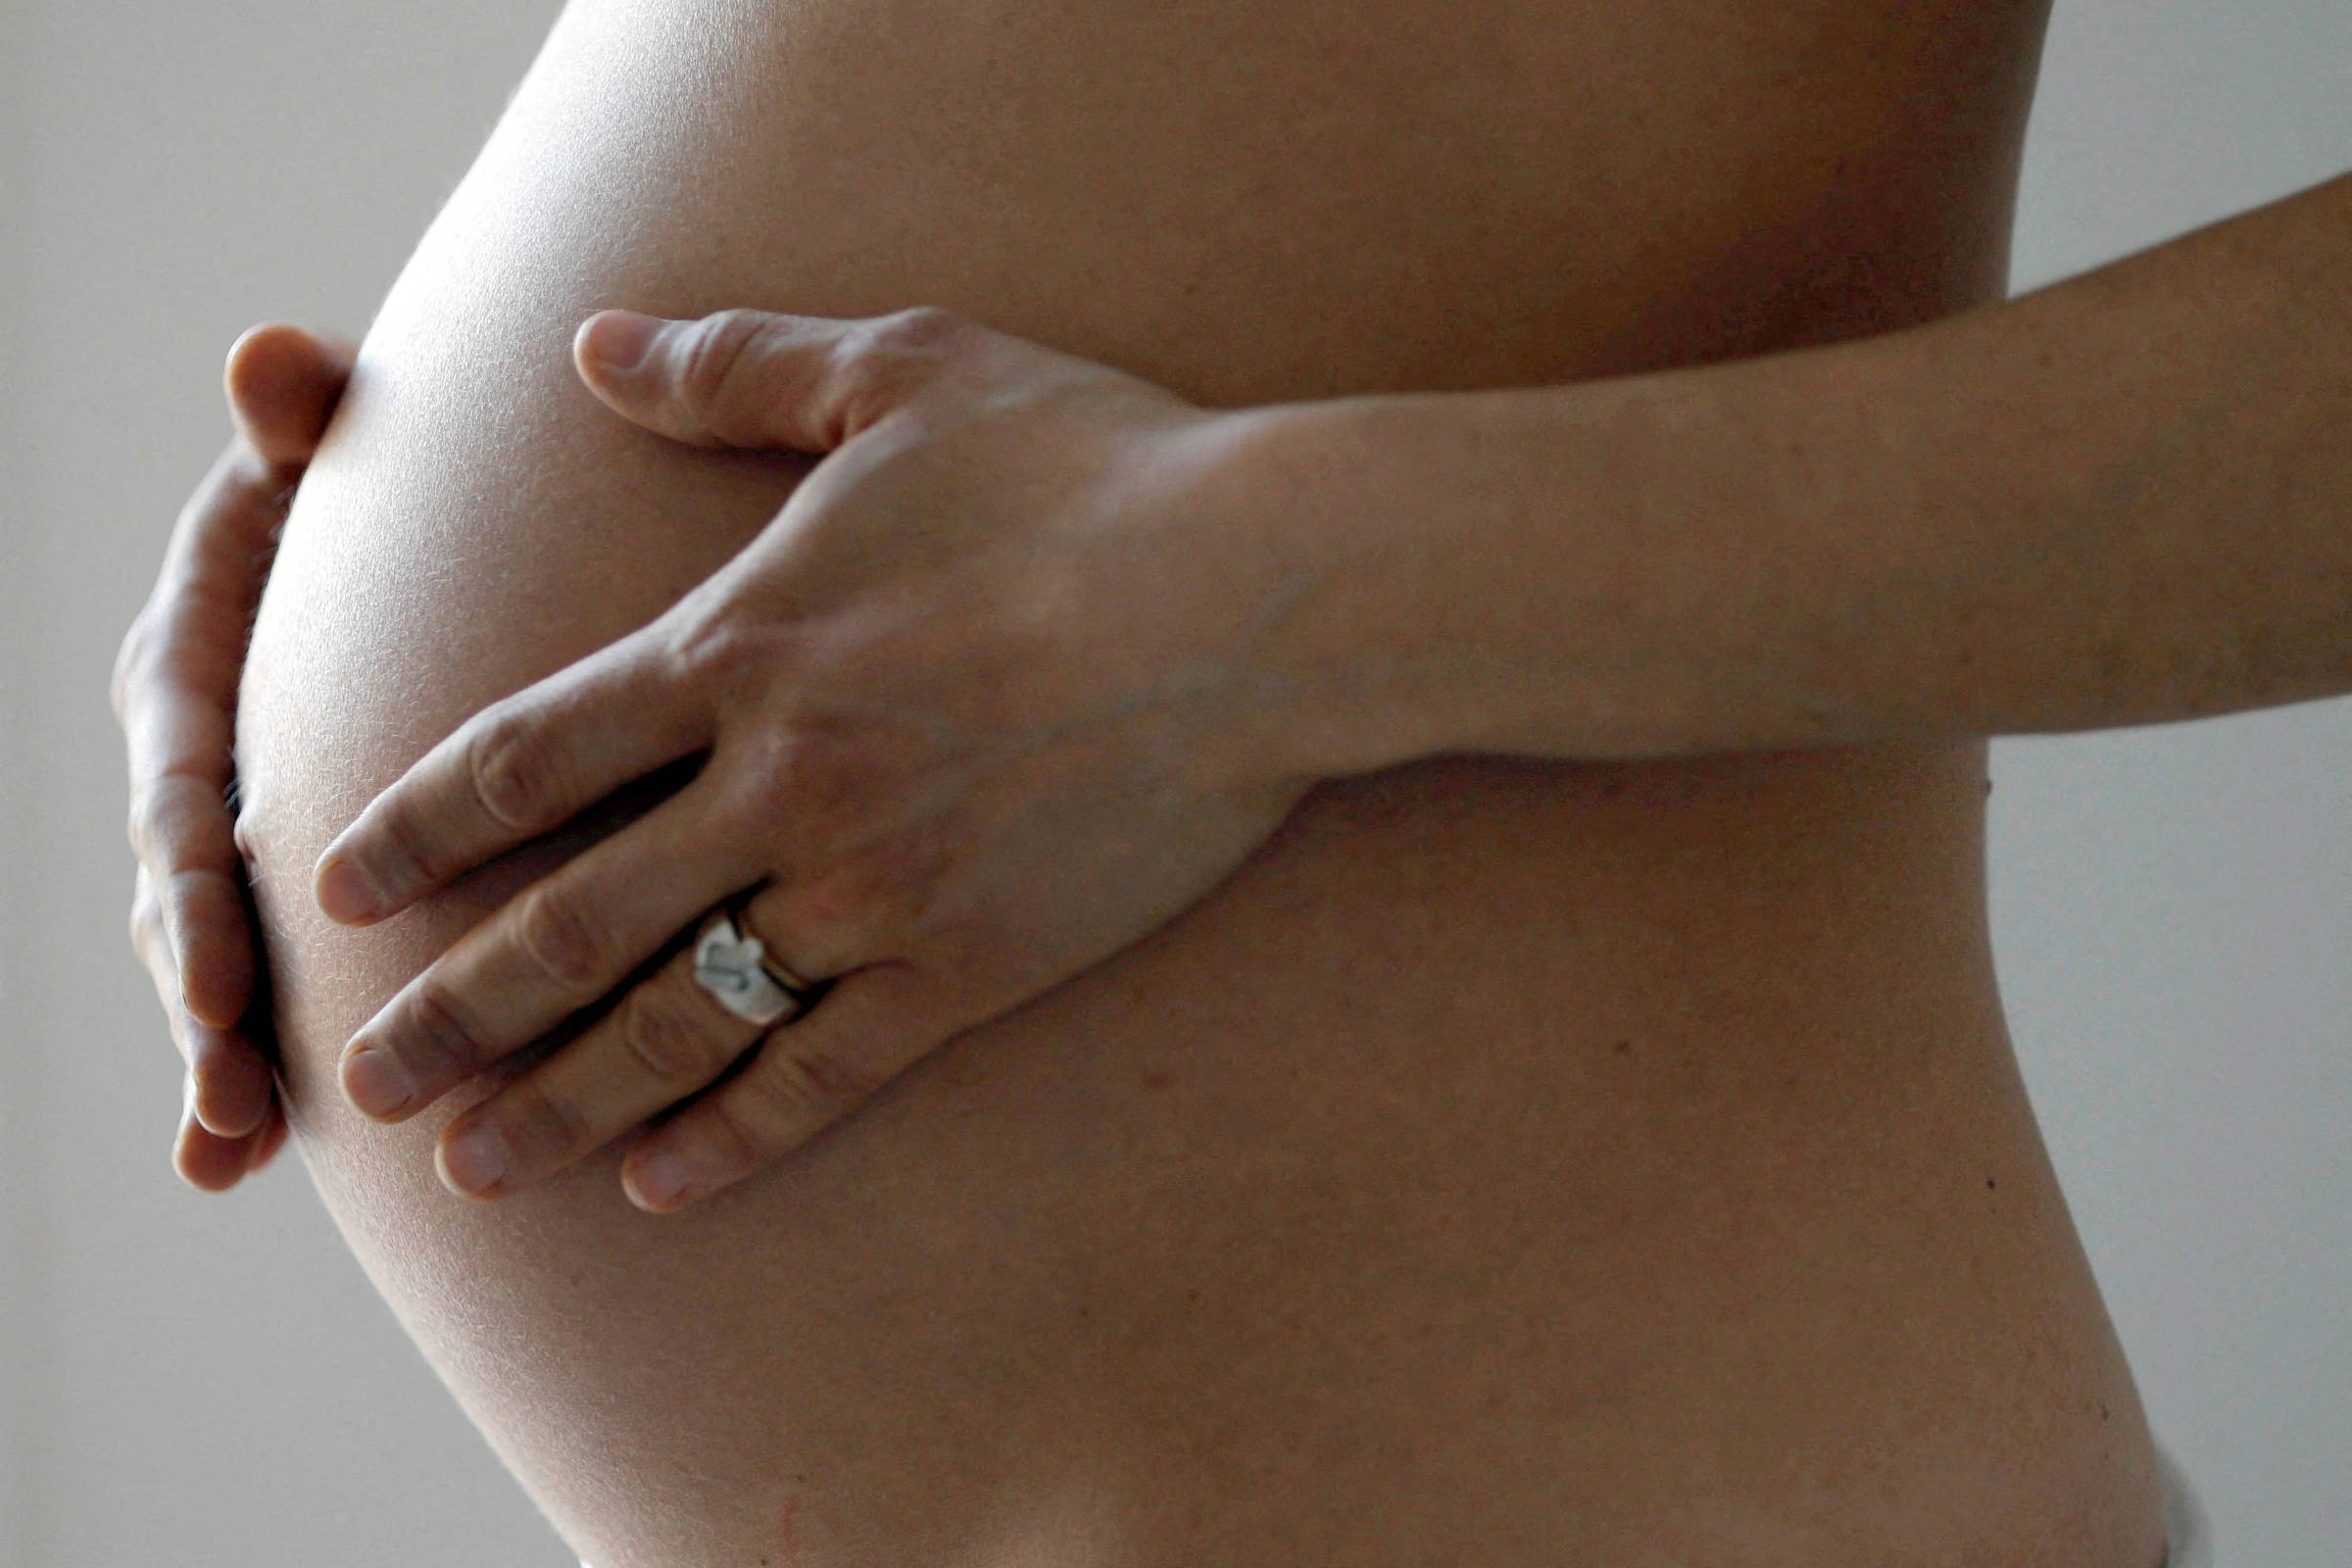 Hormone secreted by the fetus causes nausea during pregnancy, study says